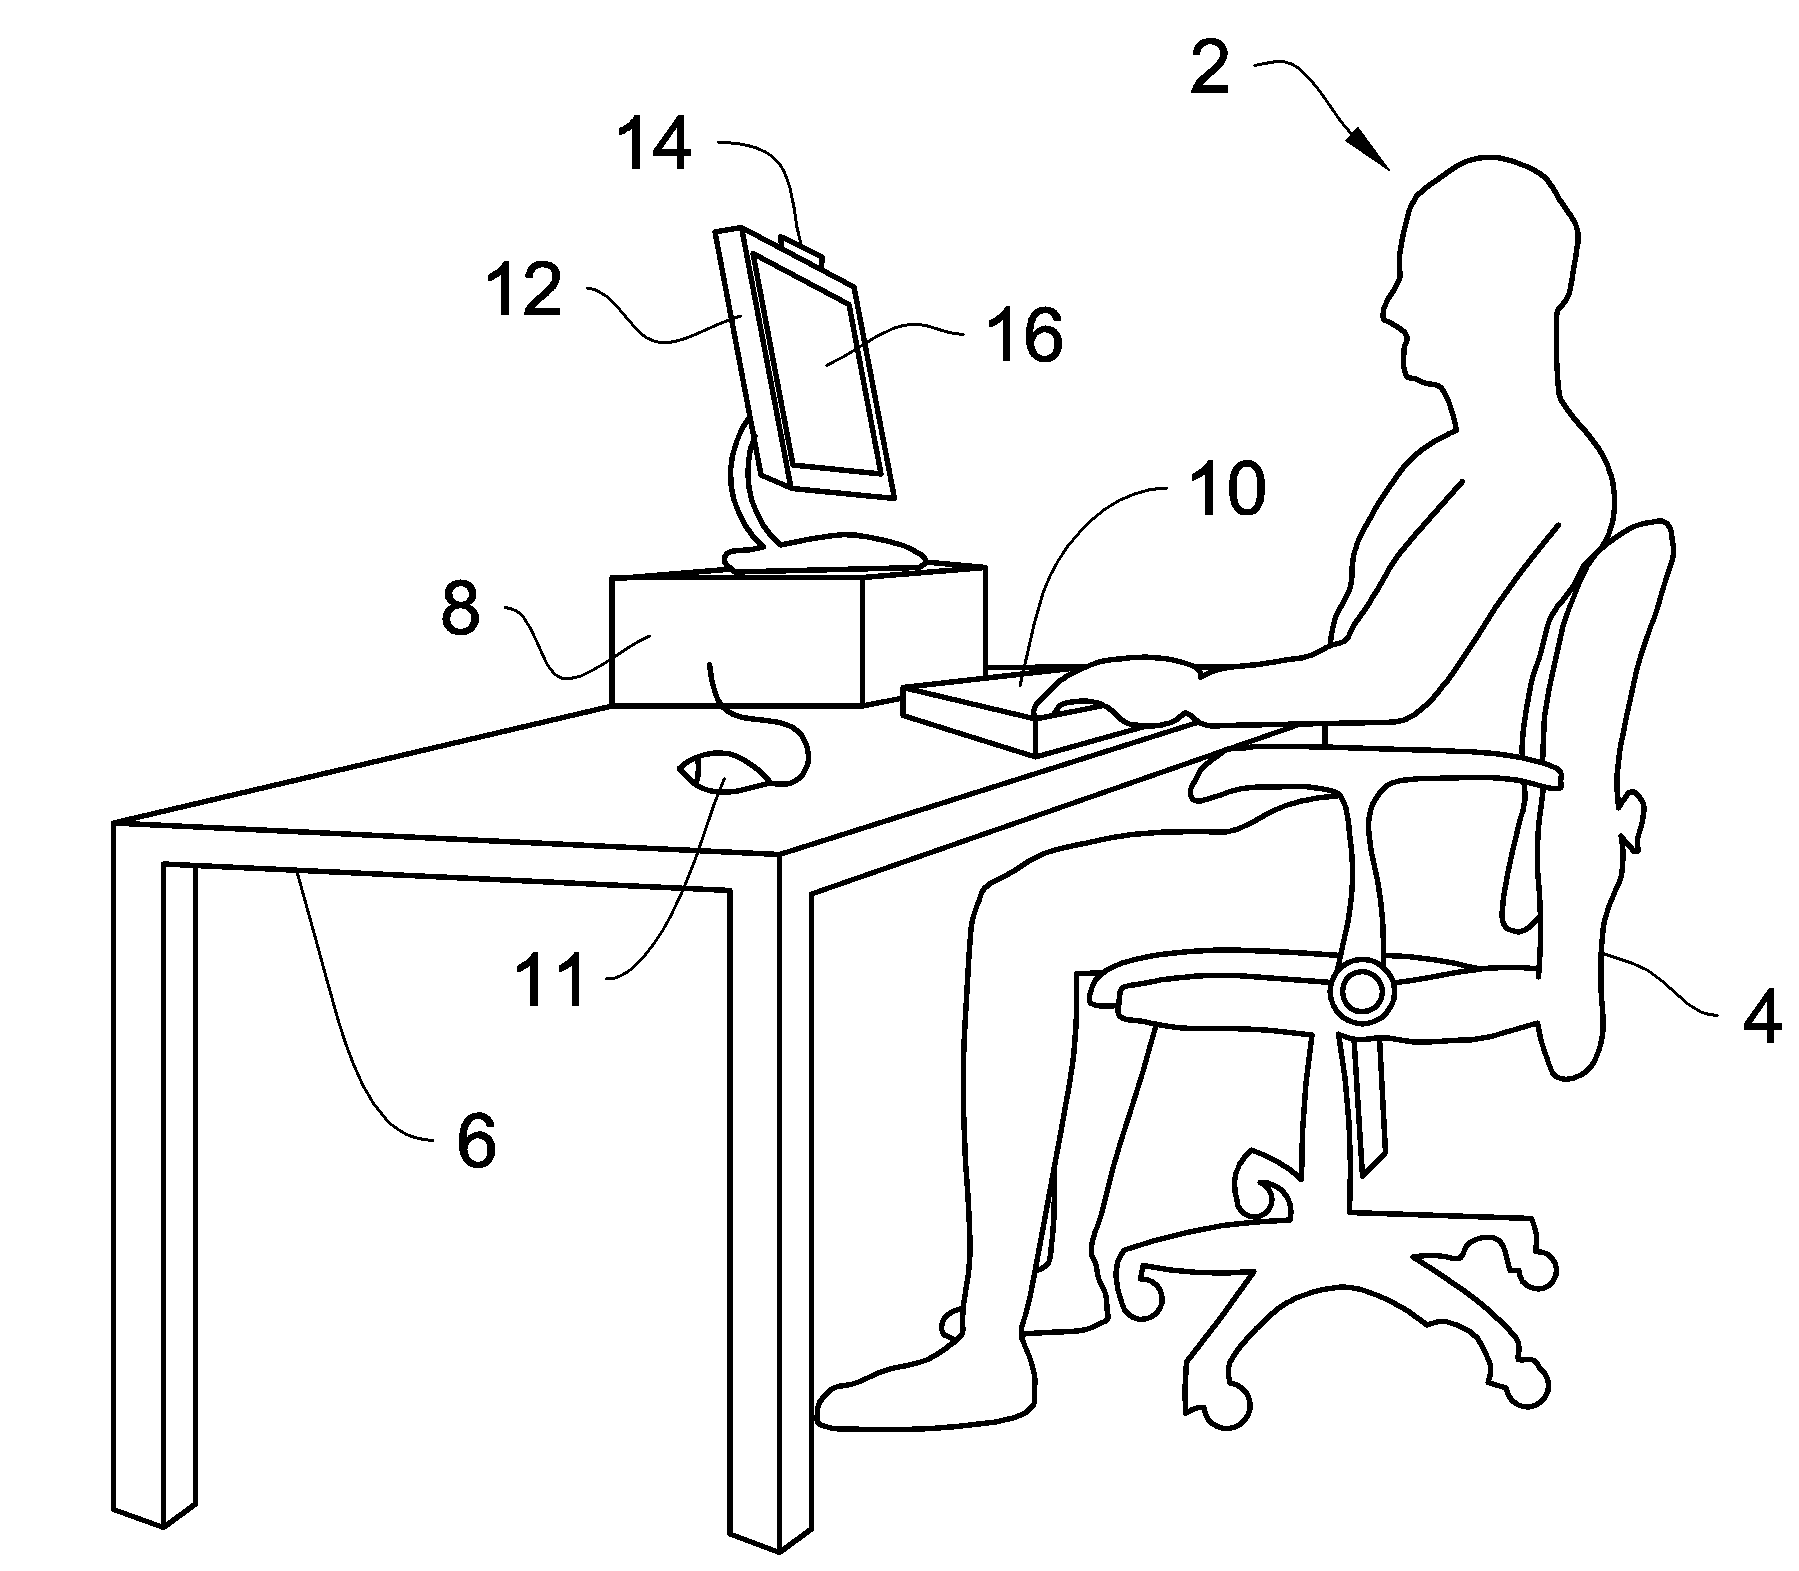 System and method for improving posture